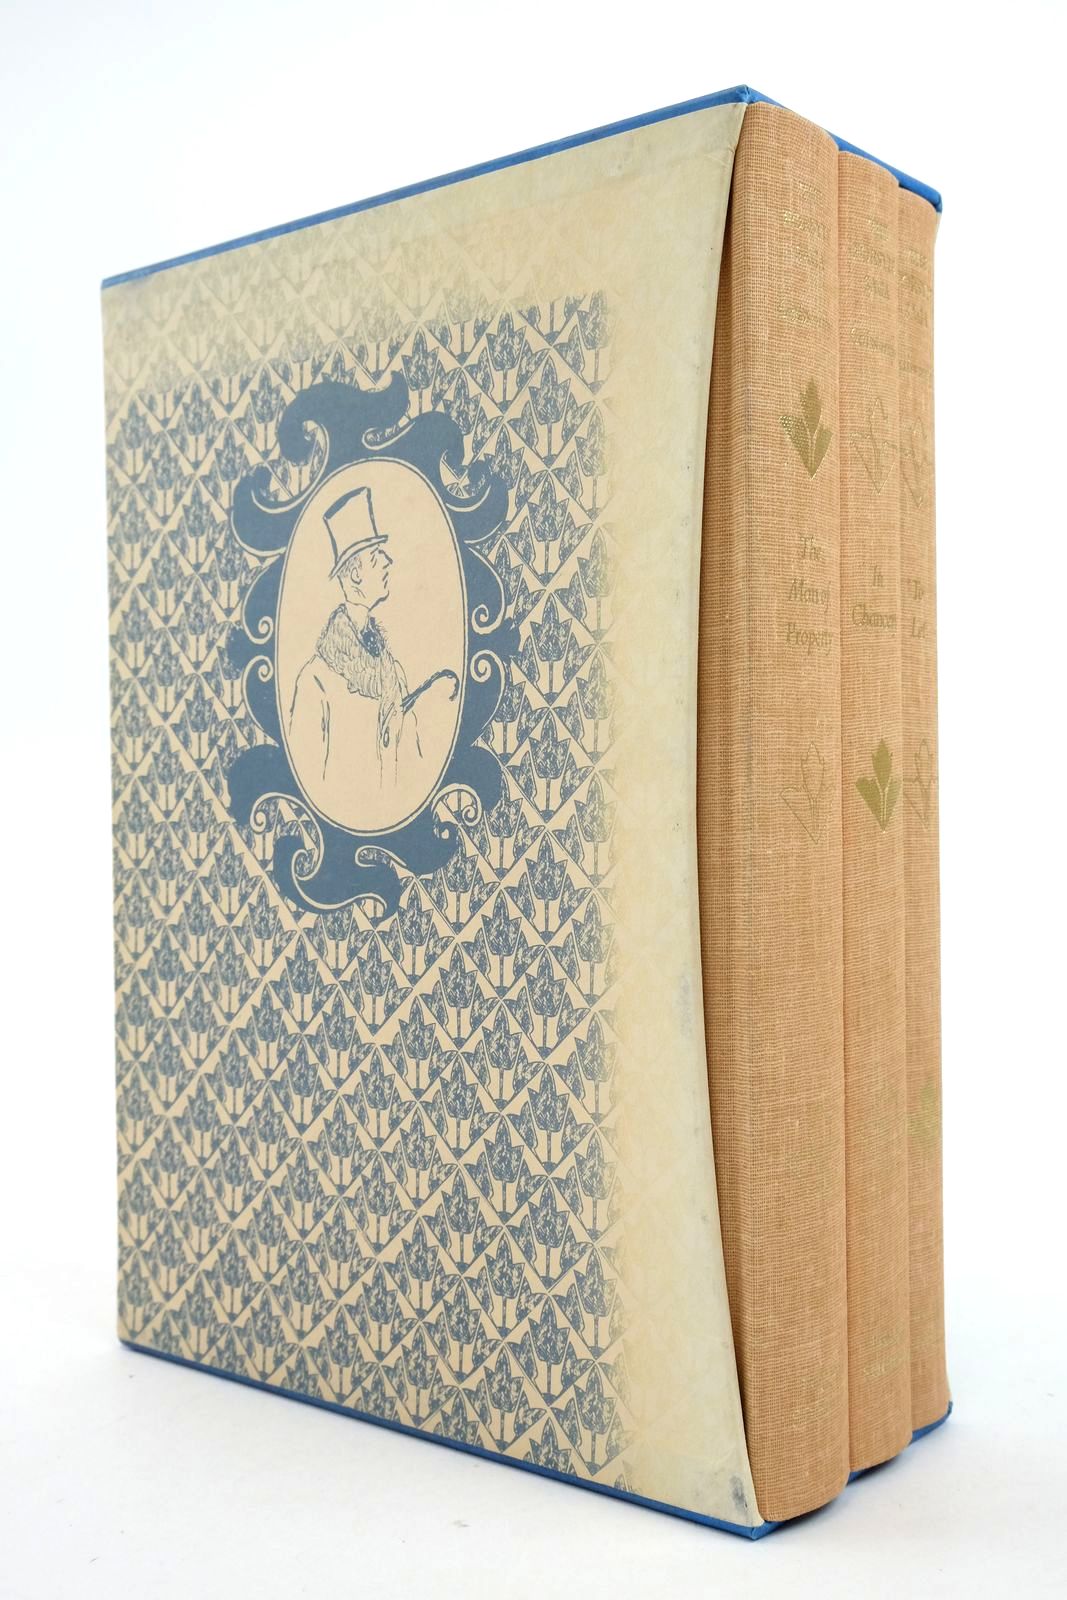 Photo of THE FORSYTE SAGA (3 VOLUMES) written by Galsworthy, John illustrated by Gross, Anthony published by Folio Society (STOCK CODE: 2137395)  for sale by Stella & Rose's Books